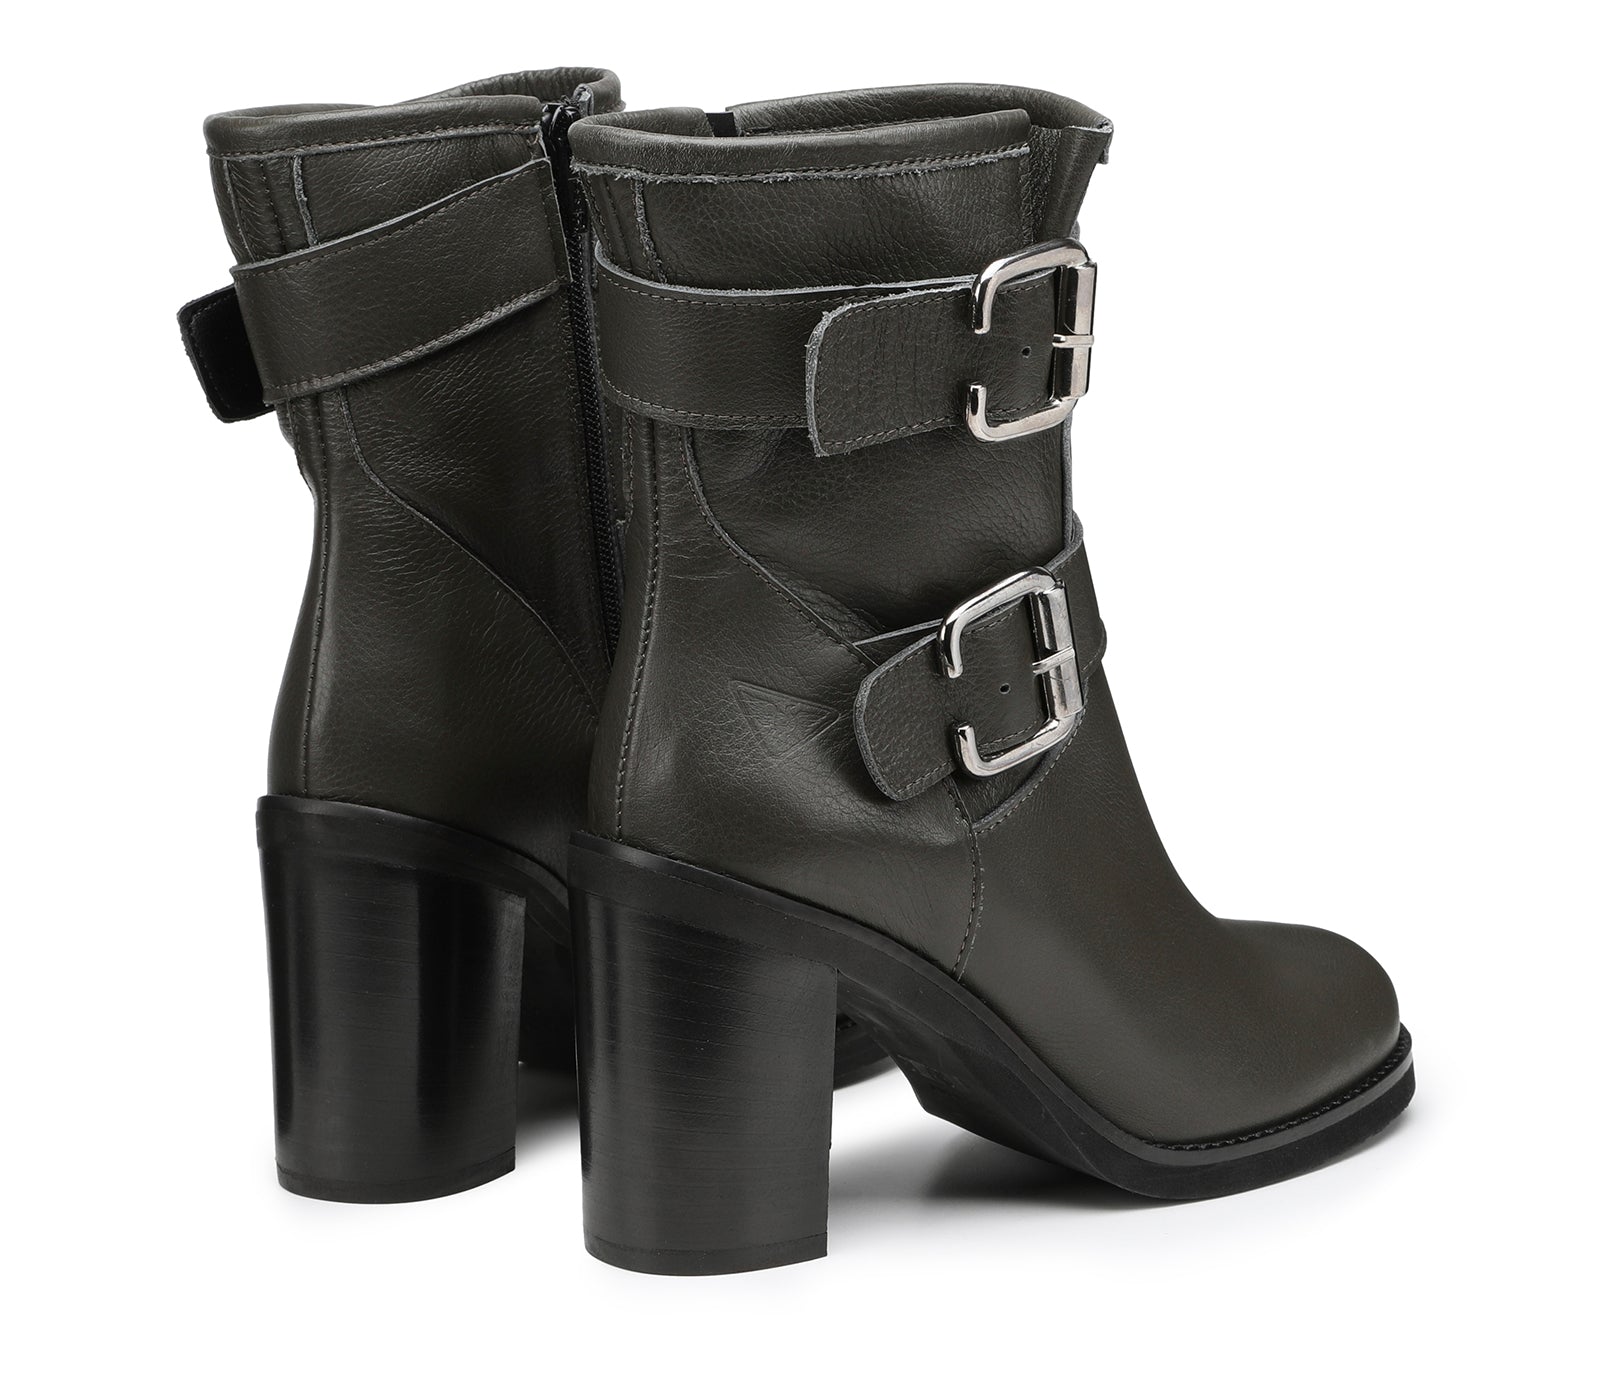 Grey Women's Ankle Boots with Wide Heels and Adjustable Straps